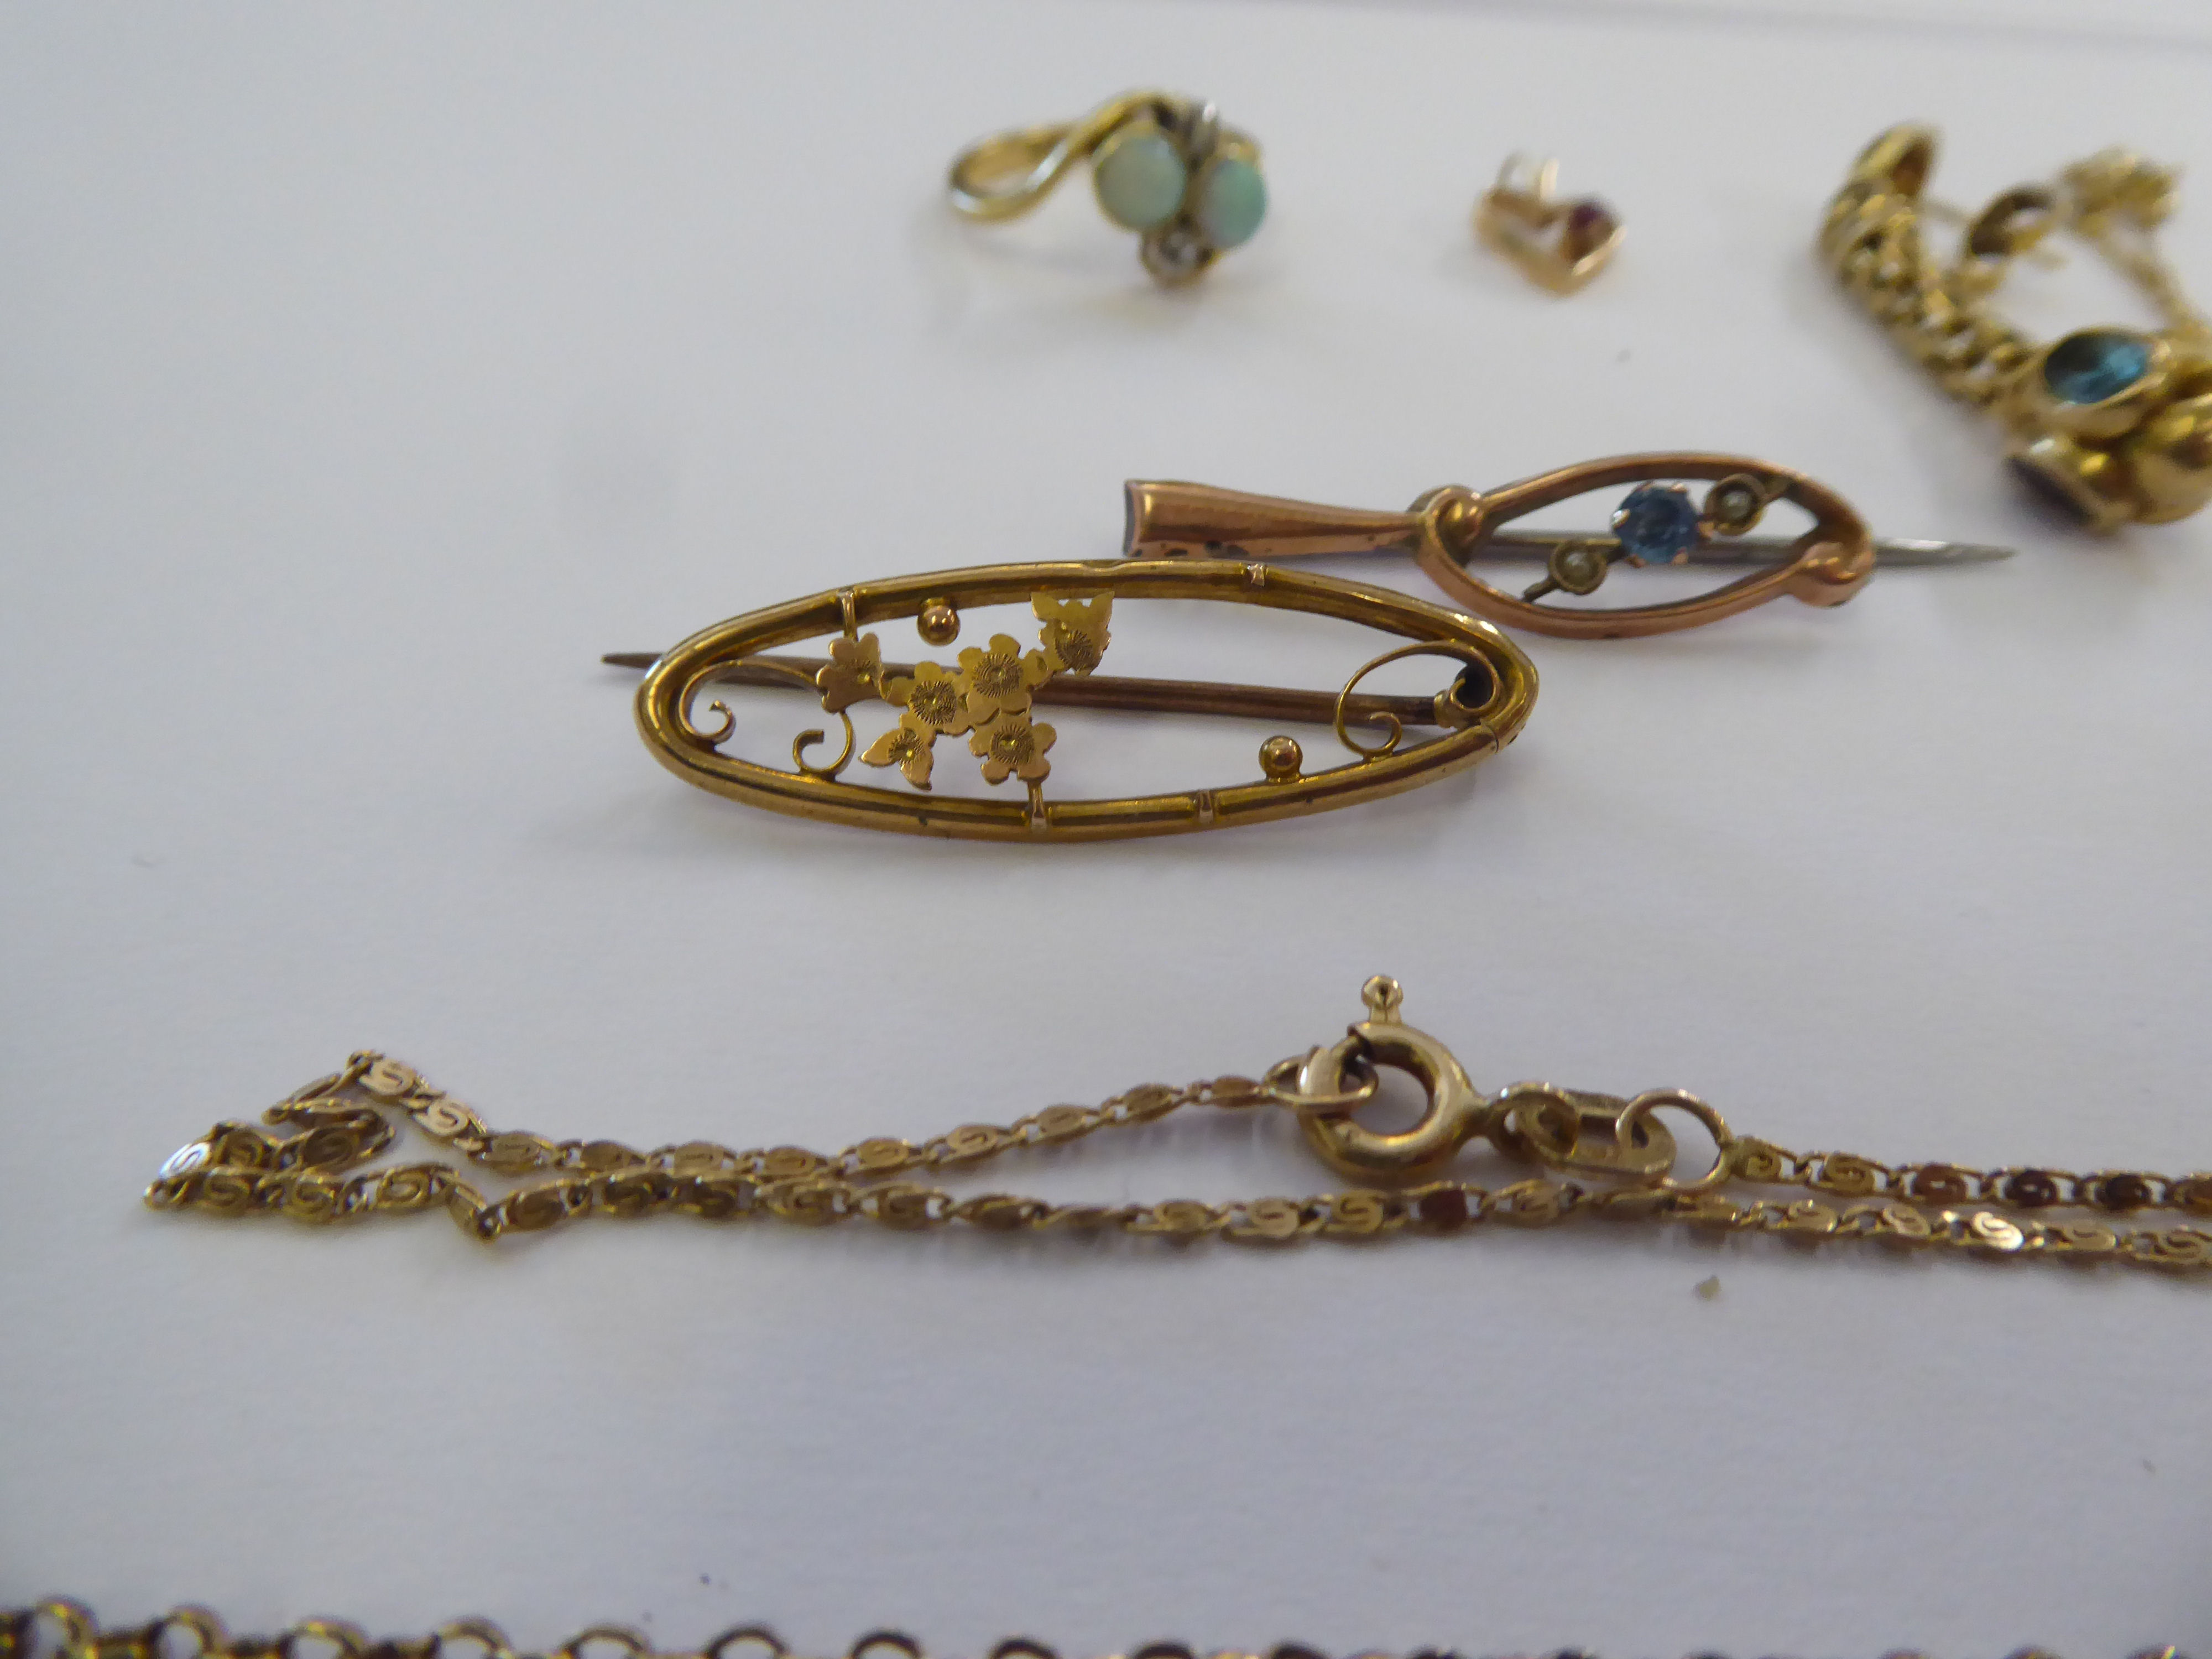 Items of personal ornament: to include two bar brooches and a pendant on a fine chain - Image 3 of 3